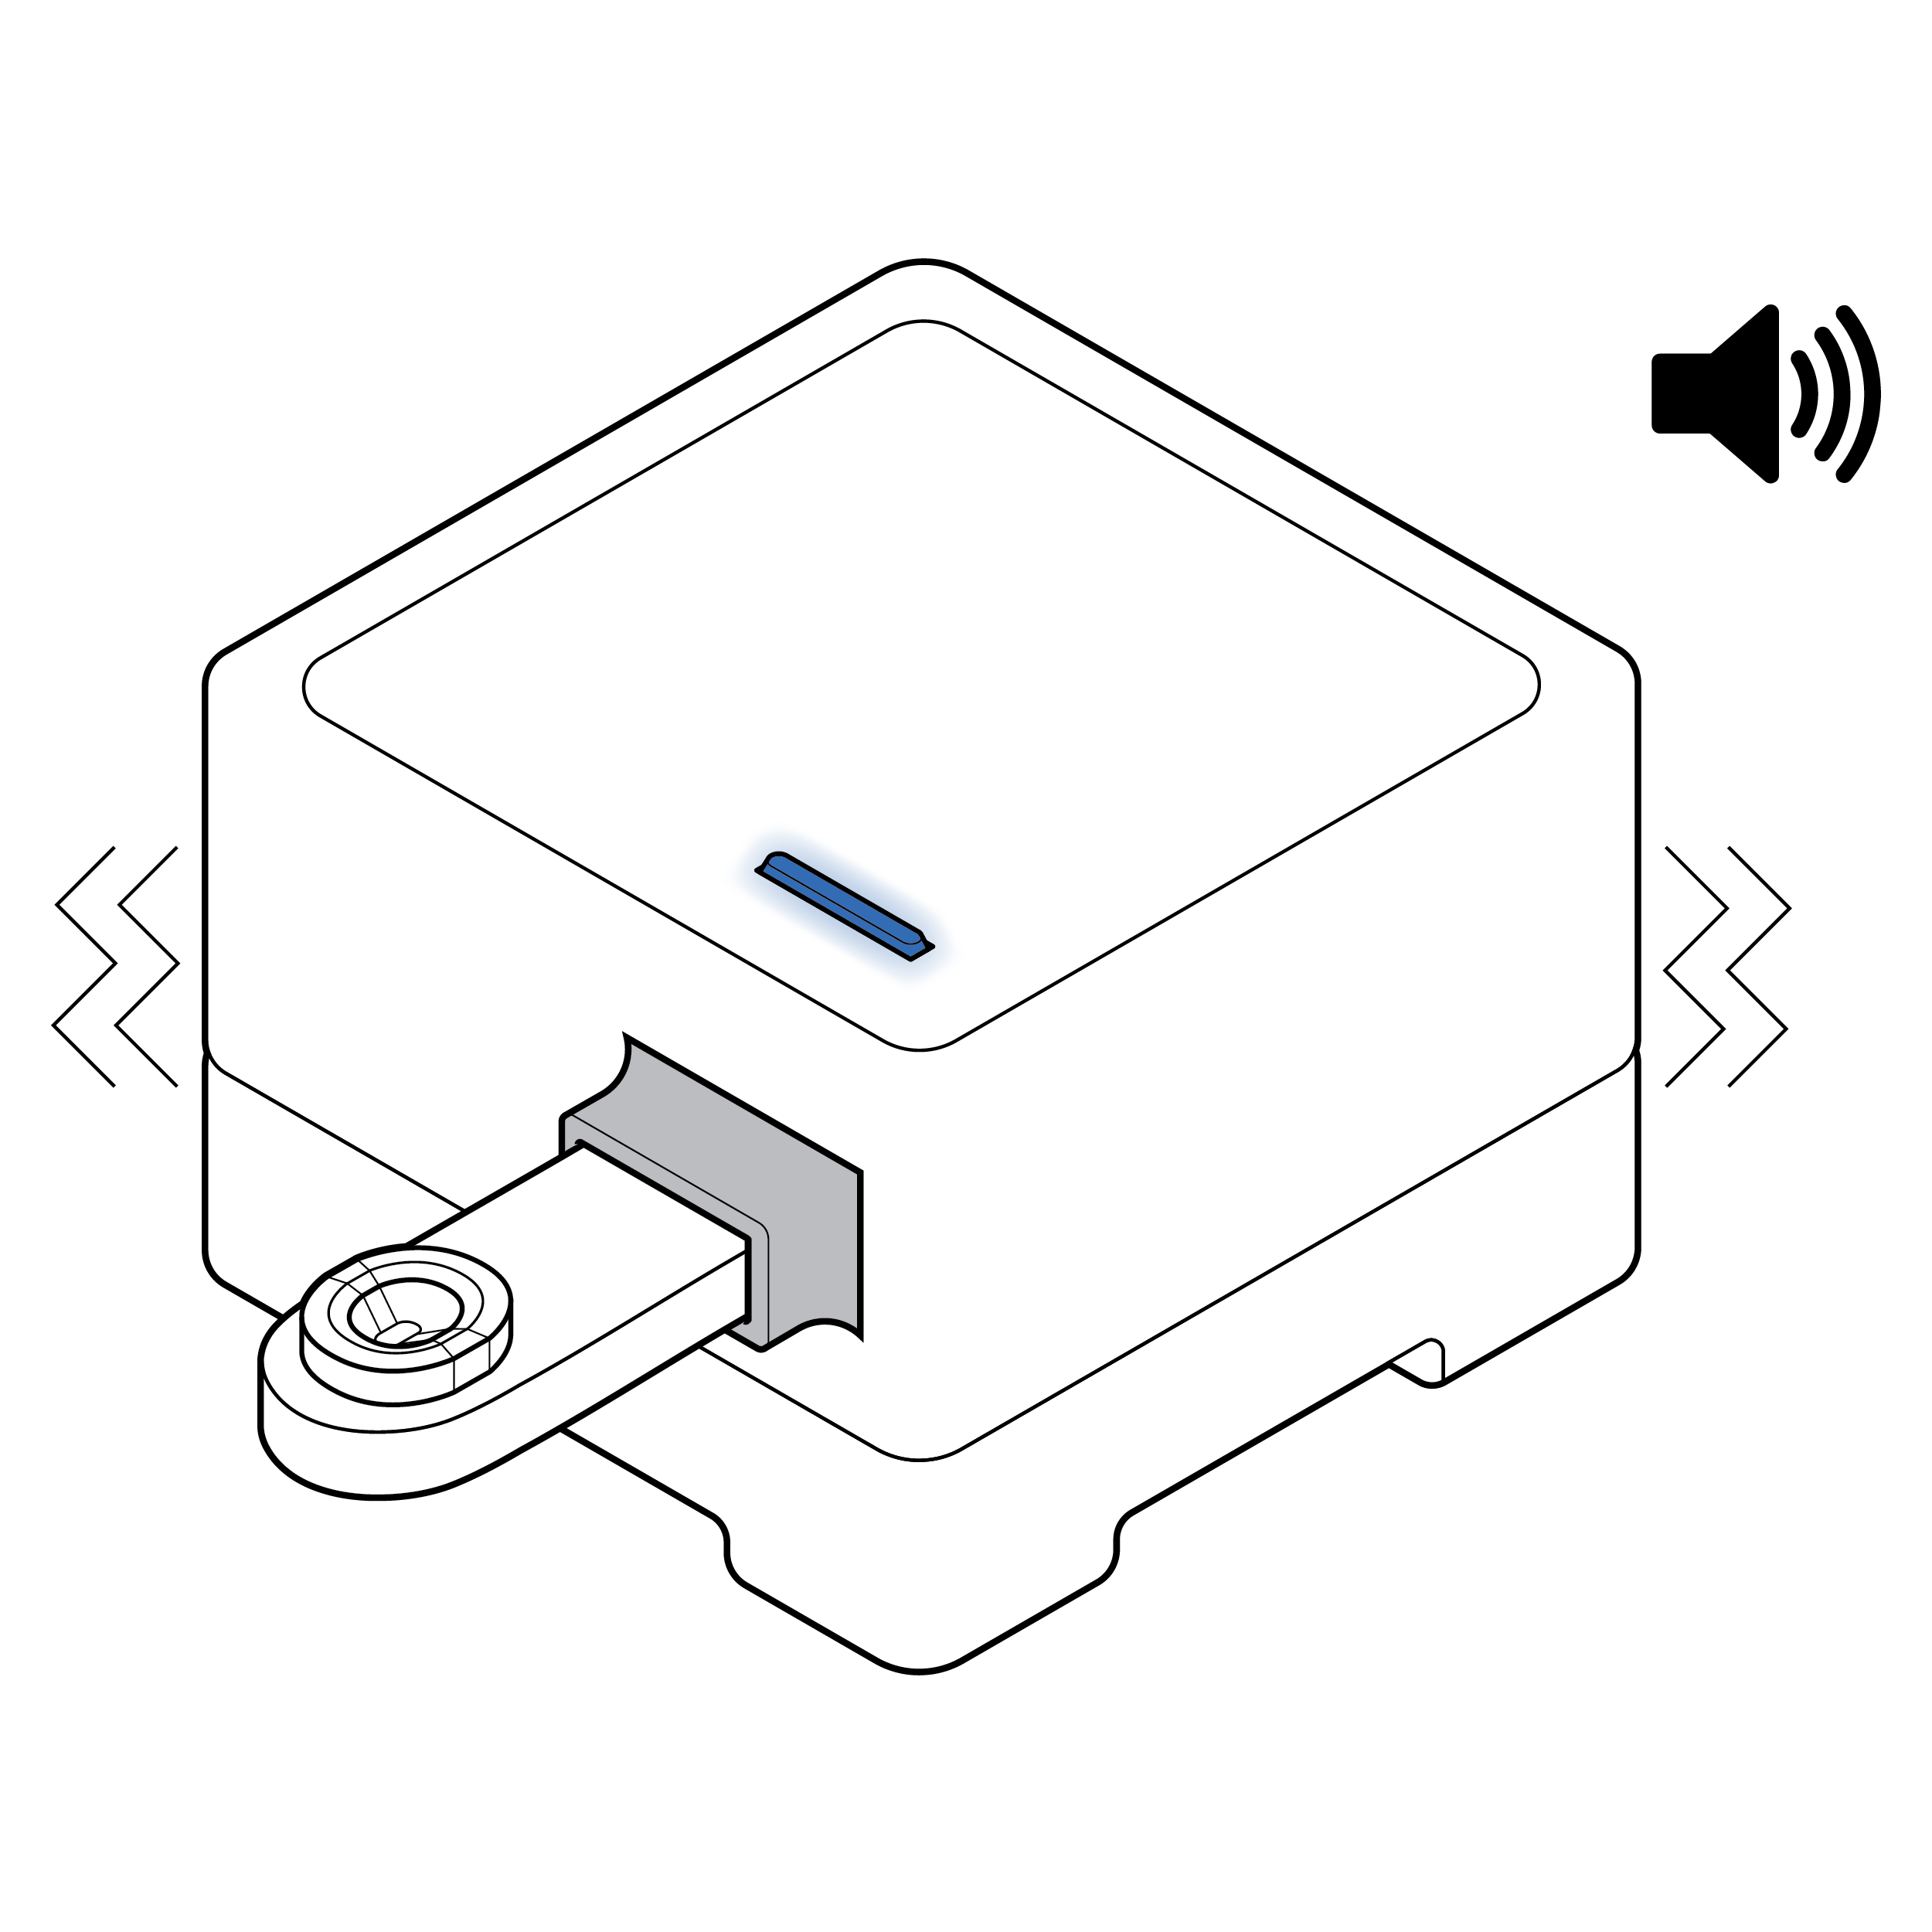 Test reader with a cassette inserted. Audio/sound and haptic or vibration symbol indicates audible and dynamic physical feedback. A LED light on top of the test reader indicated visual feedback. 